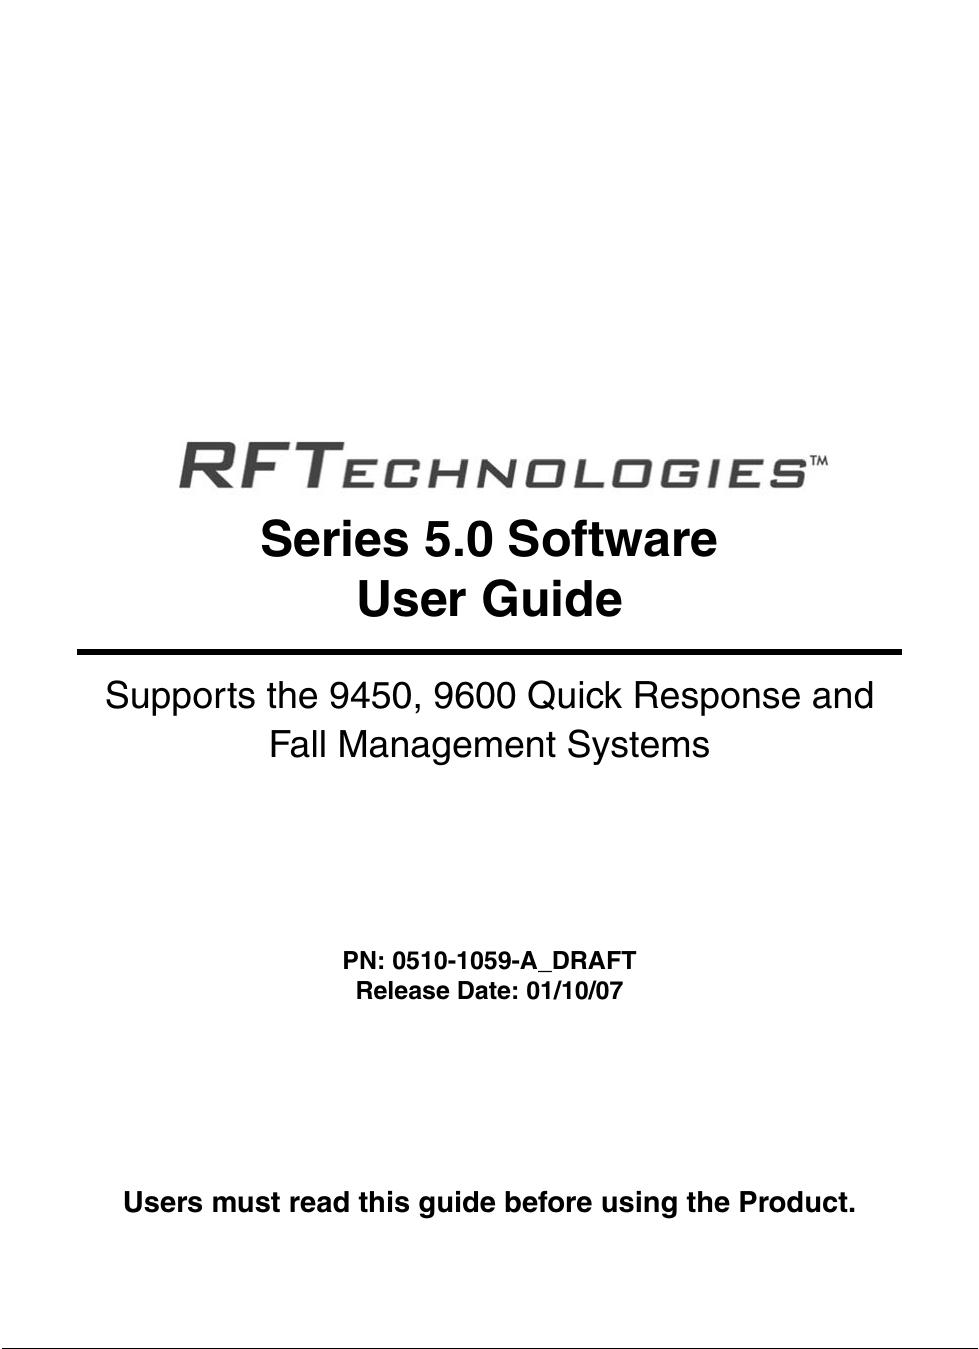 Series 5.0 SoftwareUser GuideSupports the 9450, 9600 Quick Response and Fall Management SystemsPN: 0510-1059-A_DRAFTRelease Date: 01/10/07Users must read this guide before using the Product.